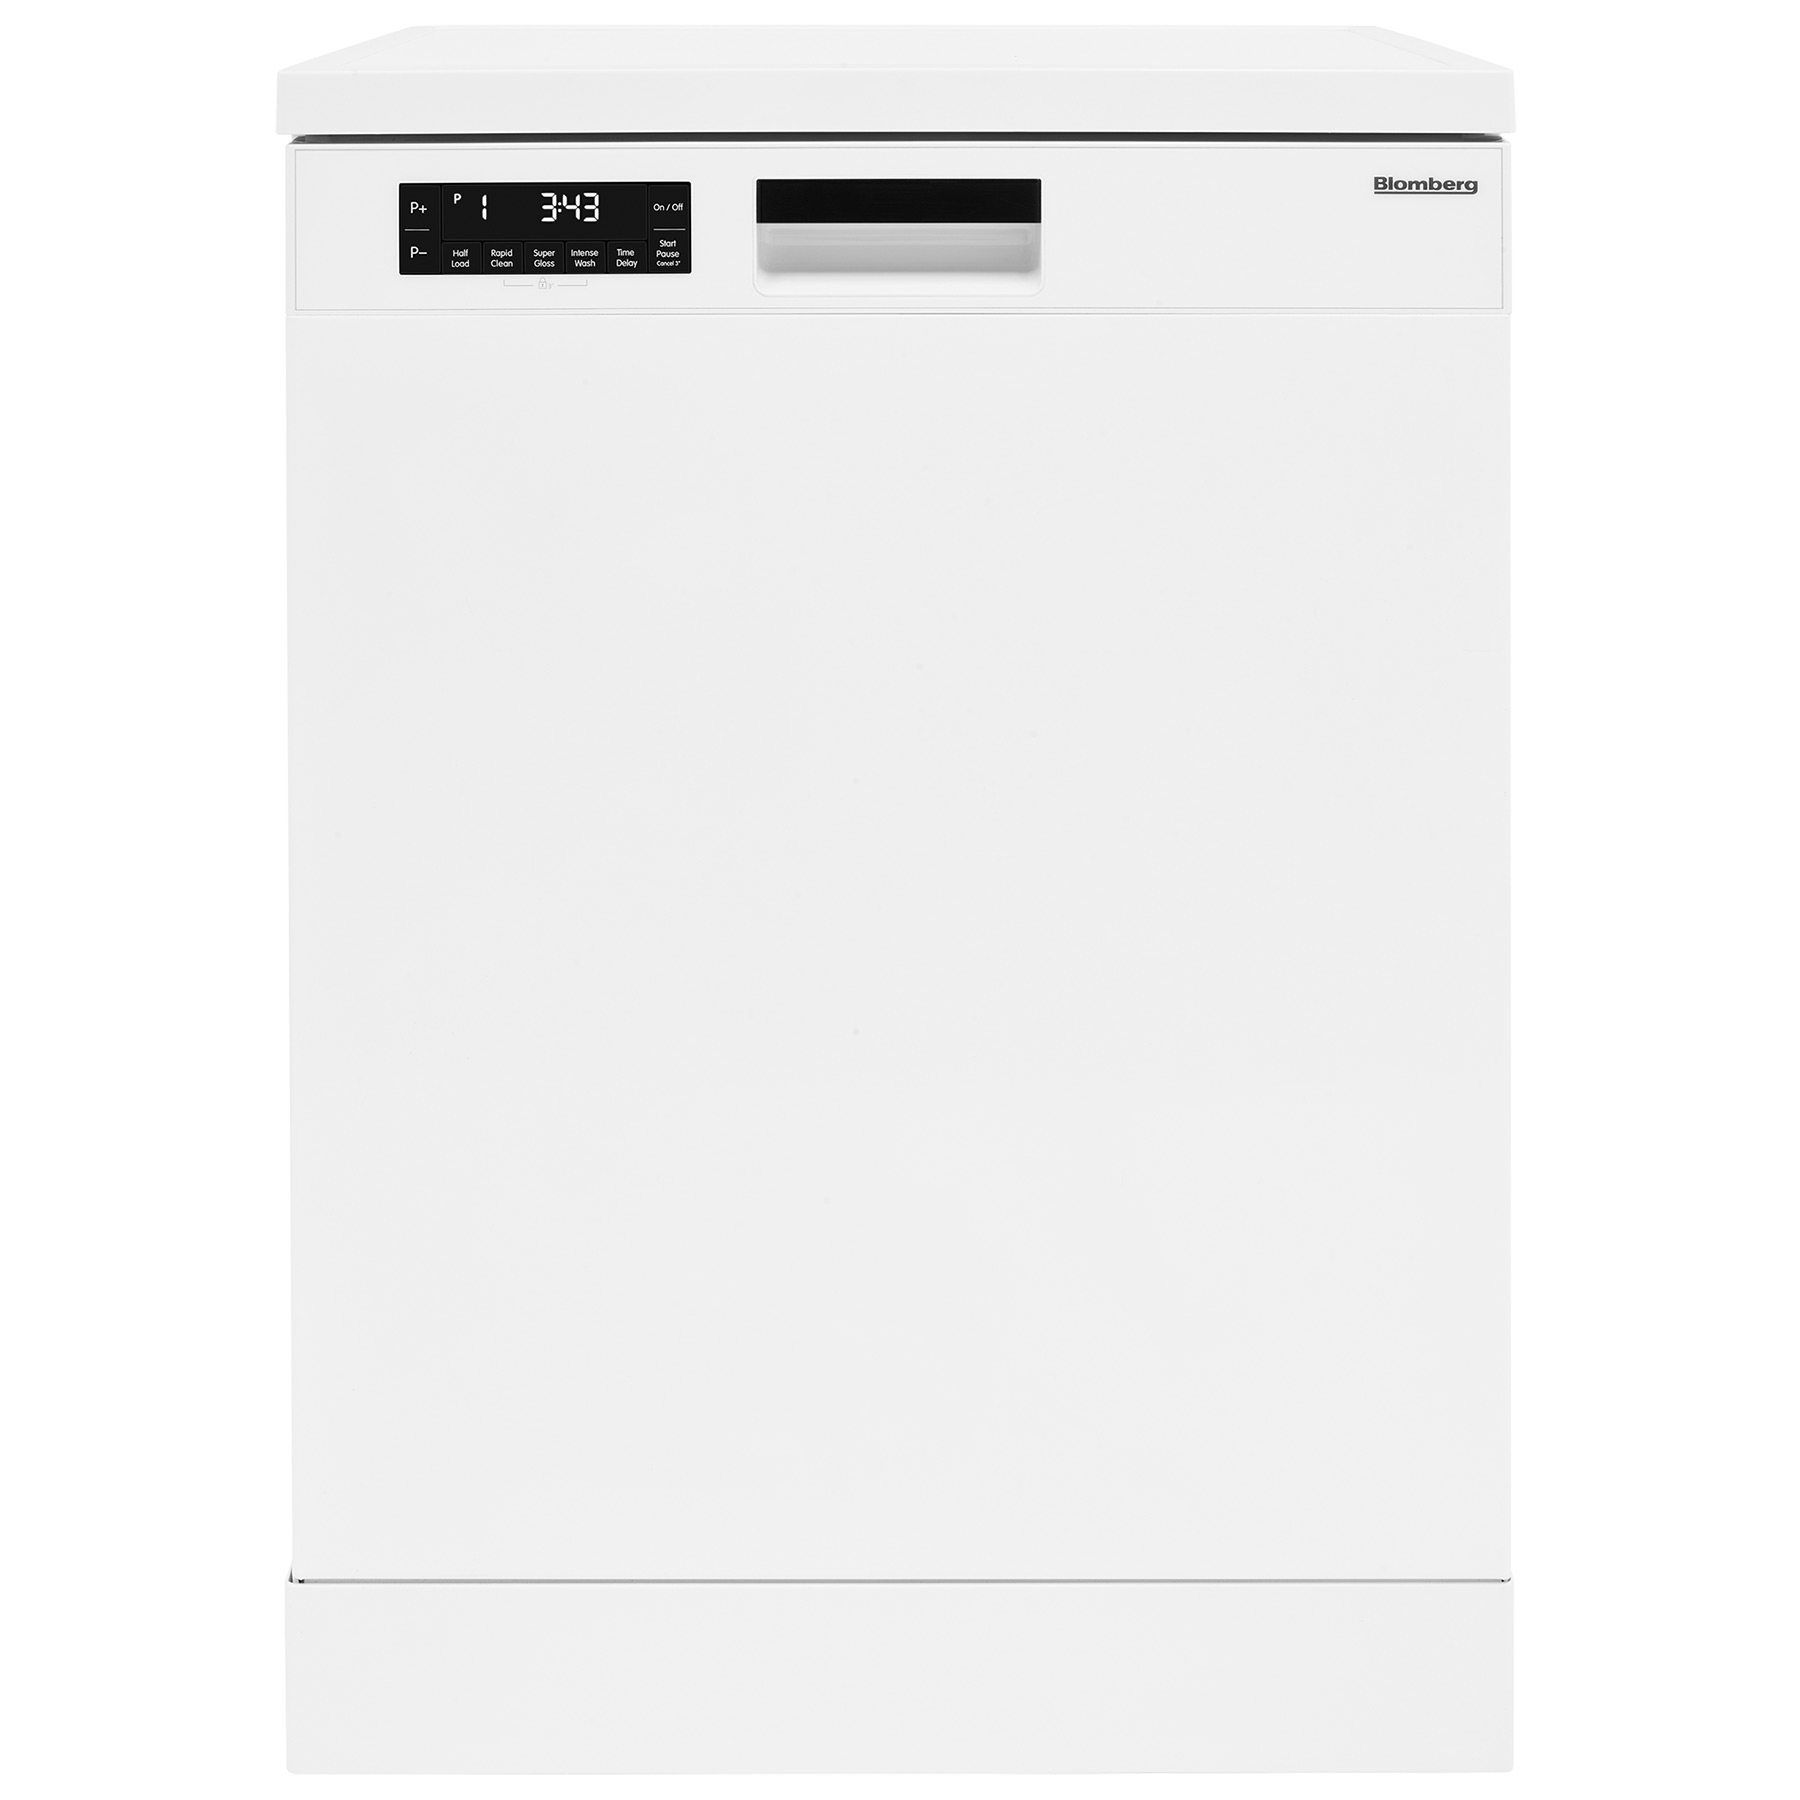 Image of Blomberg LDF42240W 60cm Dishwasher in White 14 Place Setting E Rated 3